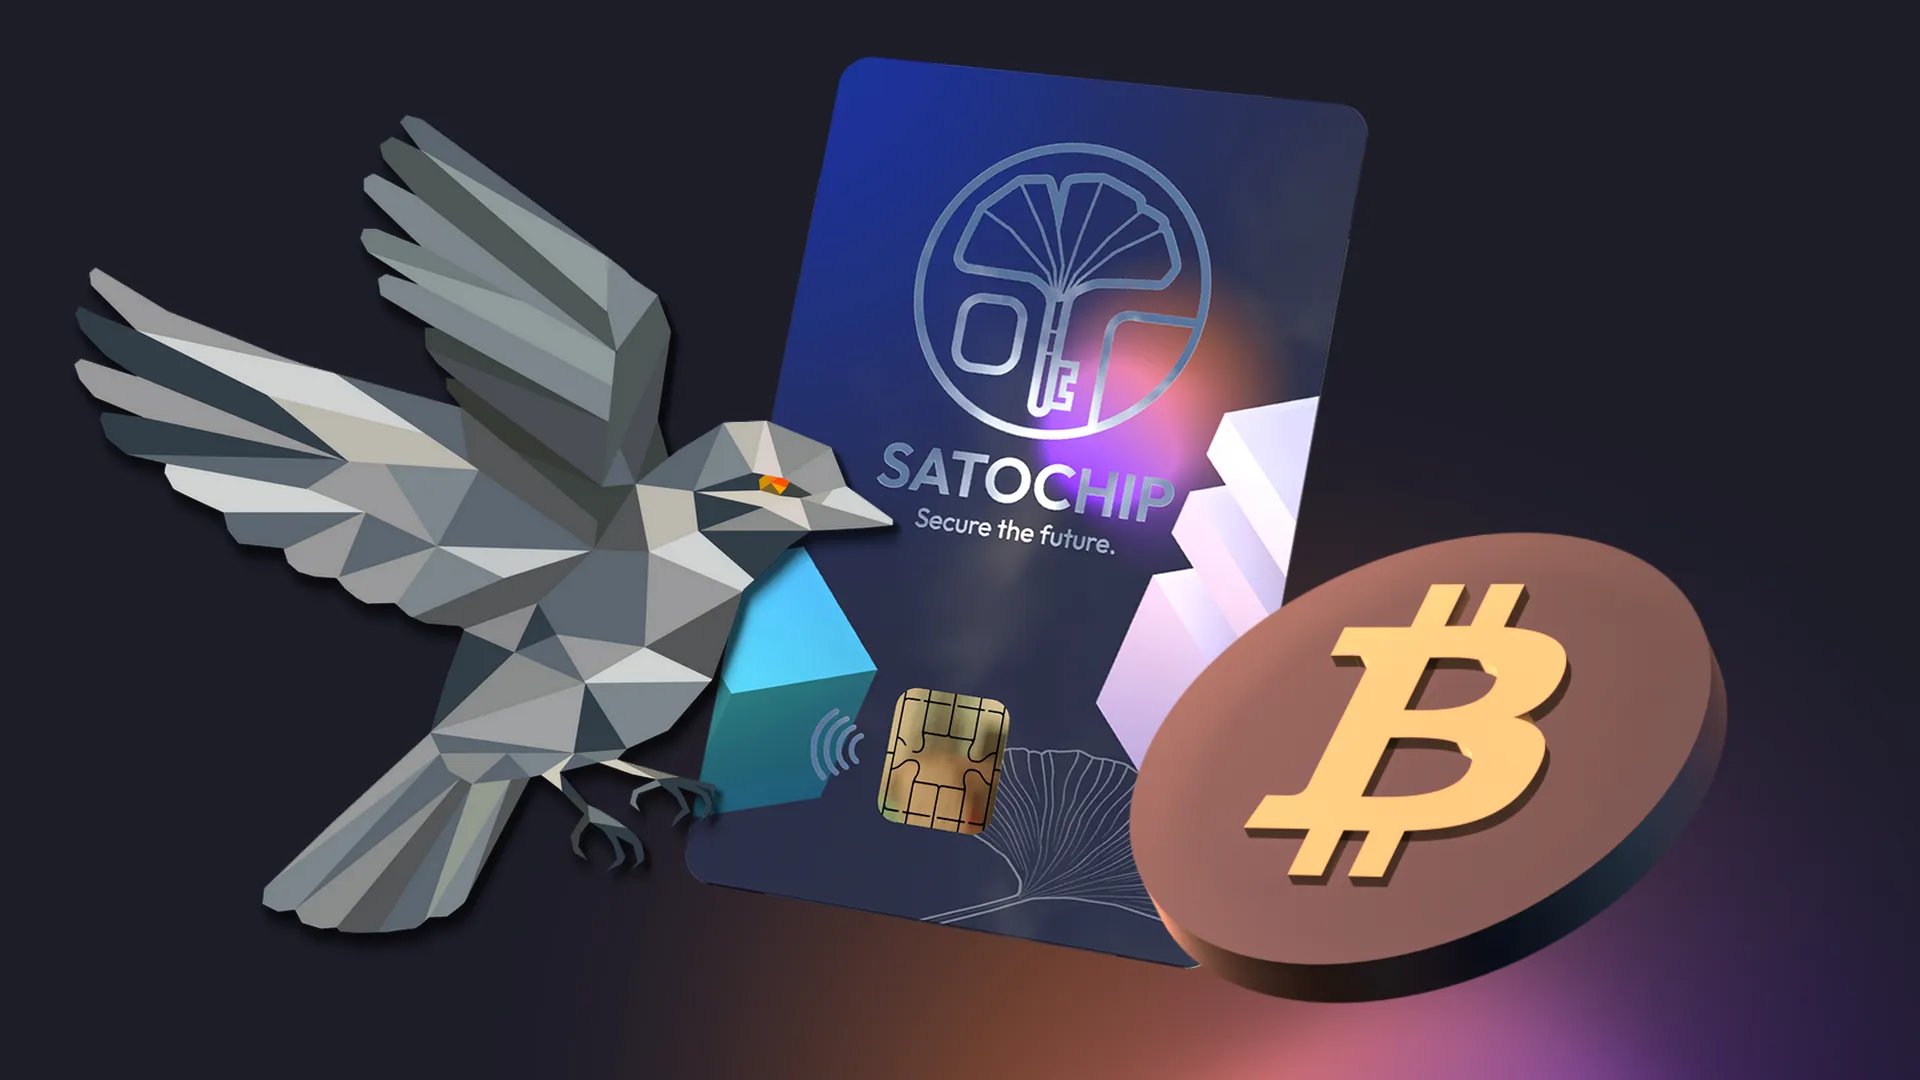 Satochip is natively supported by Sparrow Wallet for Bitcoin.